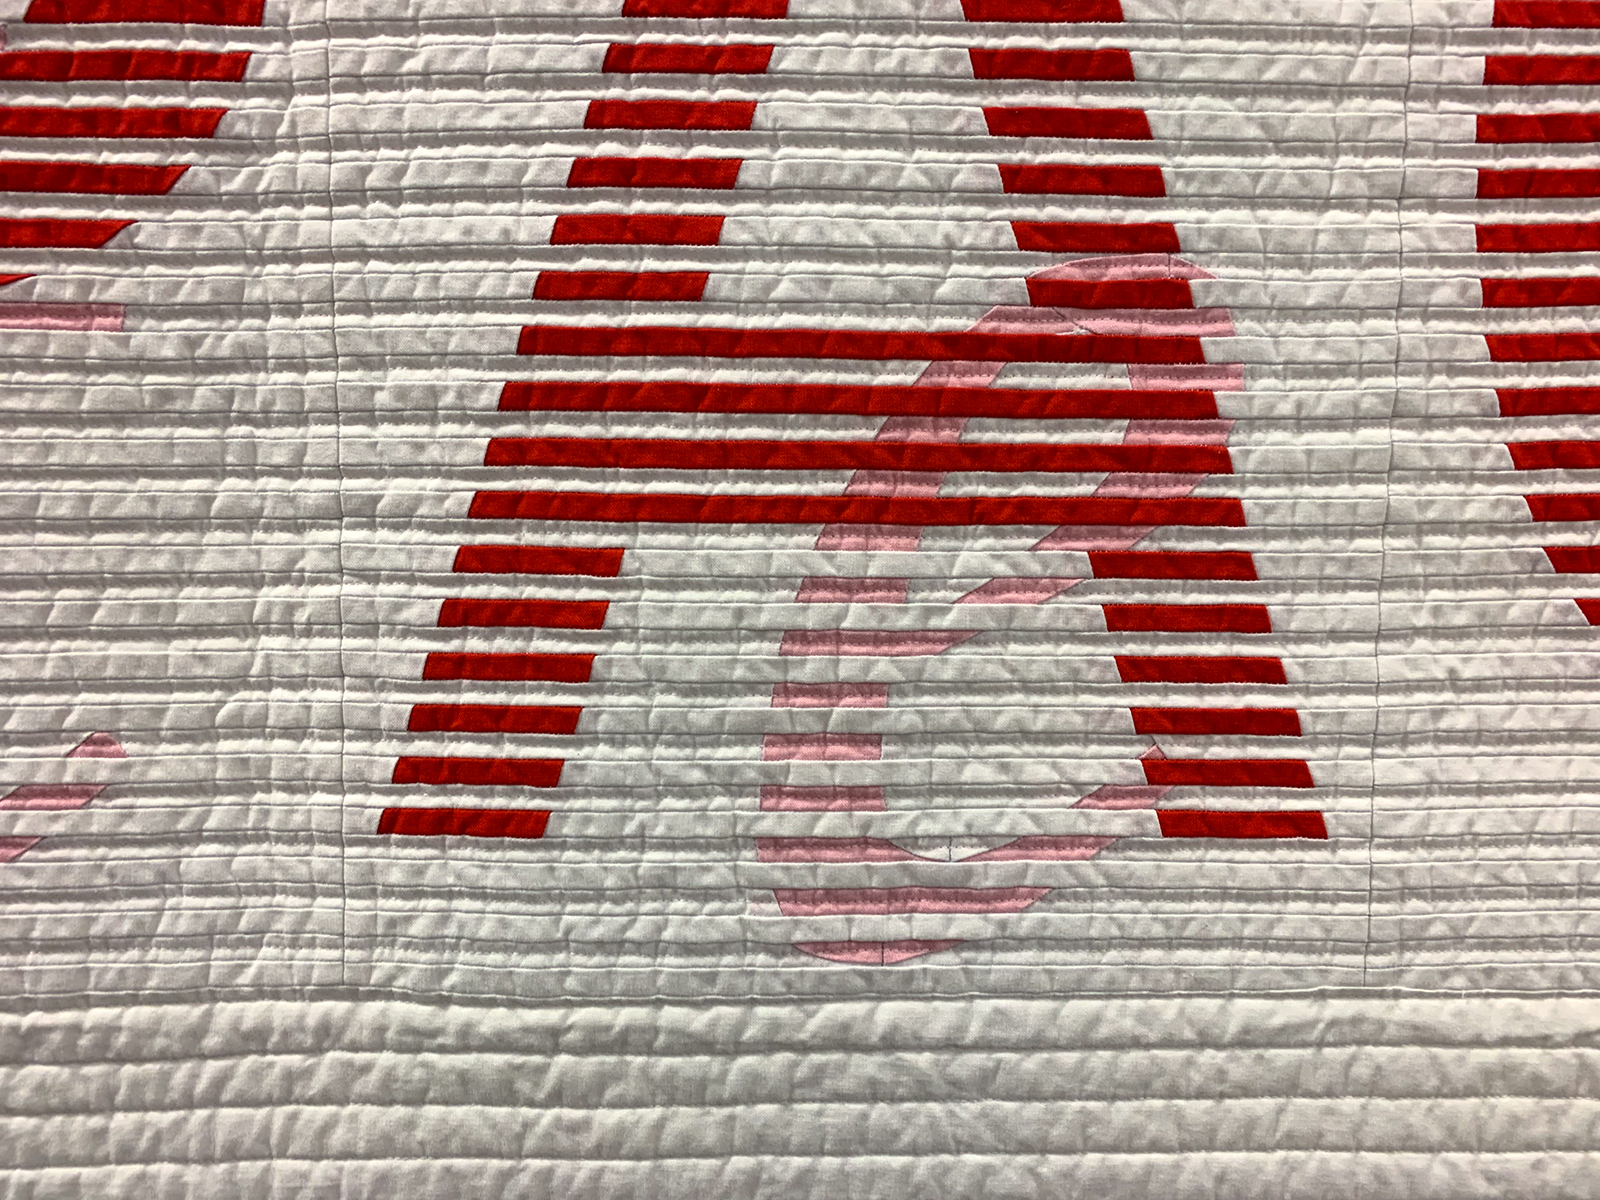 detail of Modern Quilt pieced with tiny strips intertwined to spell out Impact in large letters and Intent in small letters. 